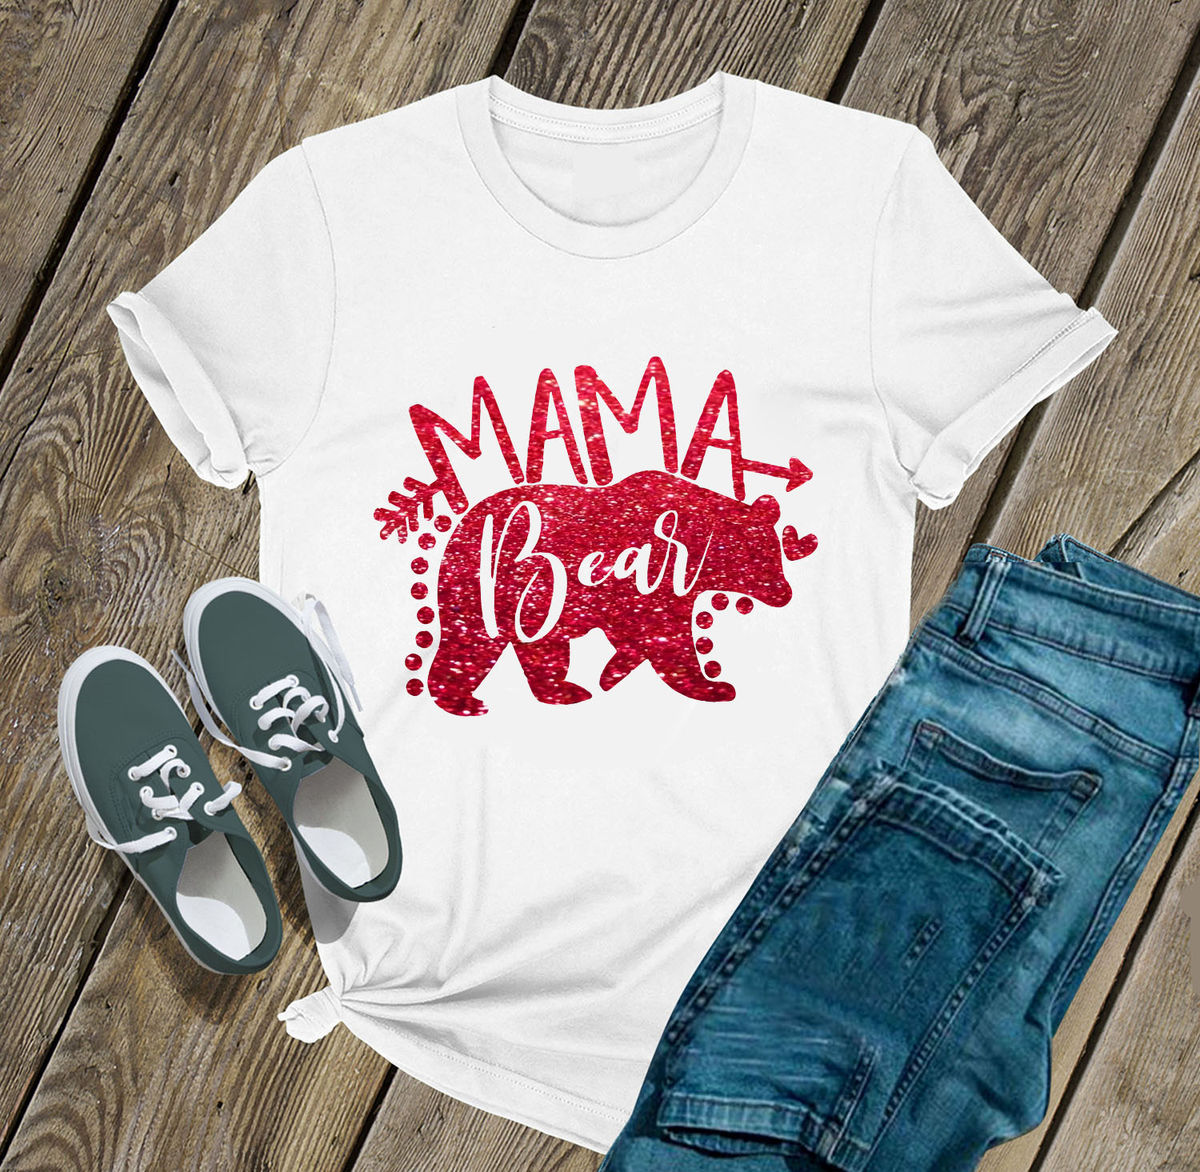 Mother's Day Shirts - Mama Bear Shirt, Mother's Day Gift, Gift For Mom,  Baby Shower Gifts, Cute Mama Bear Shirt, Mother Gift Idea 28395